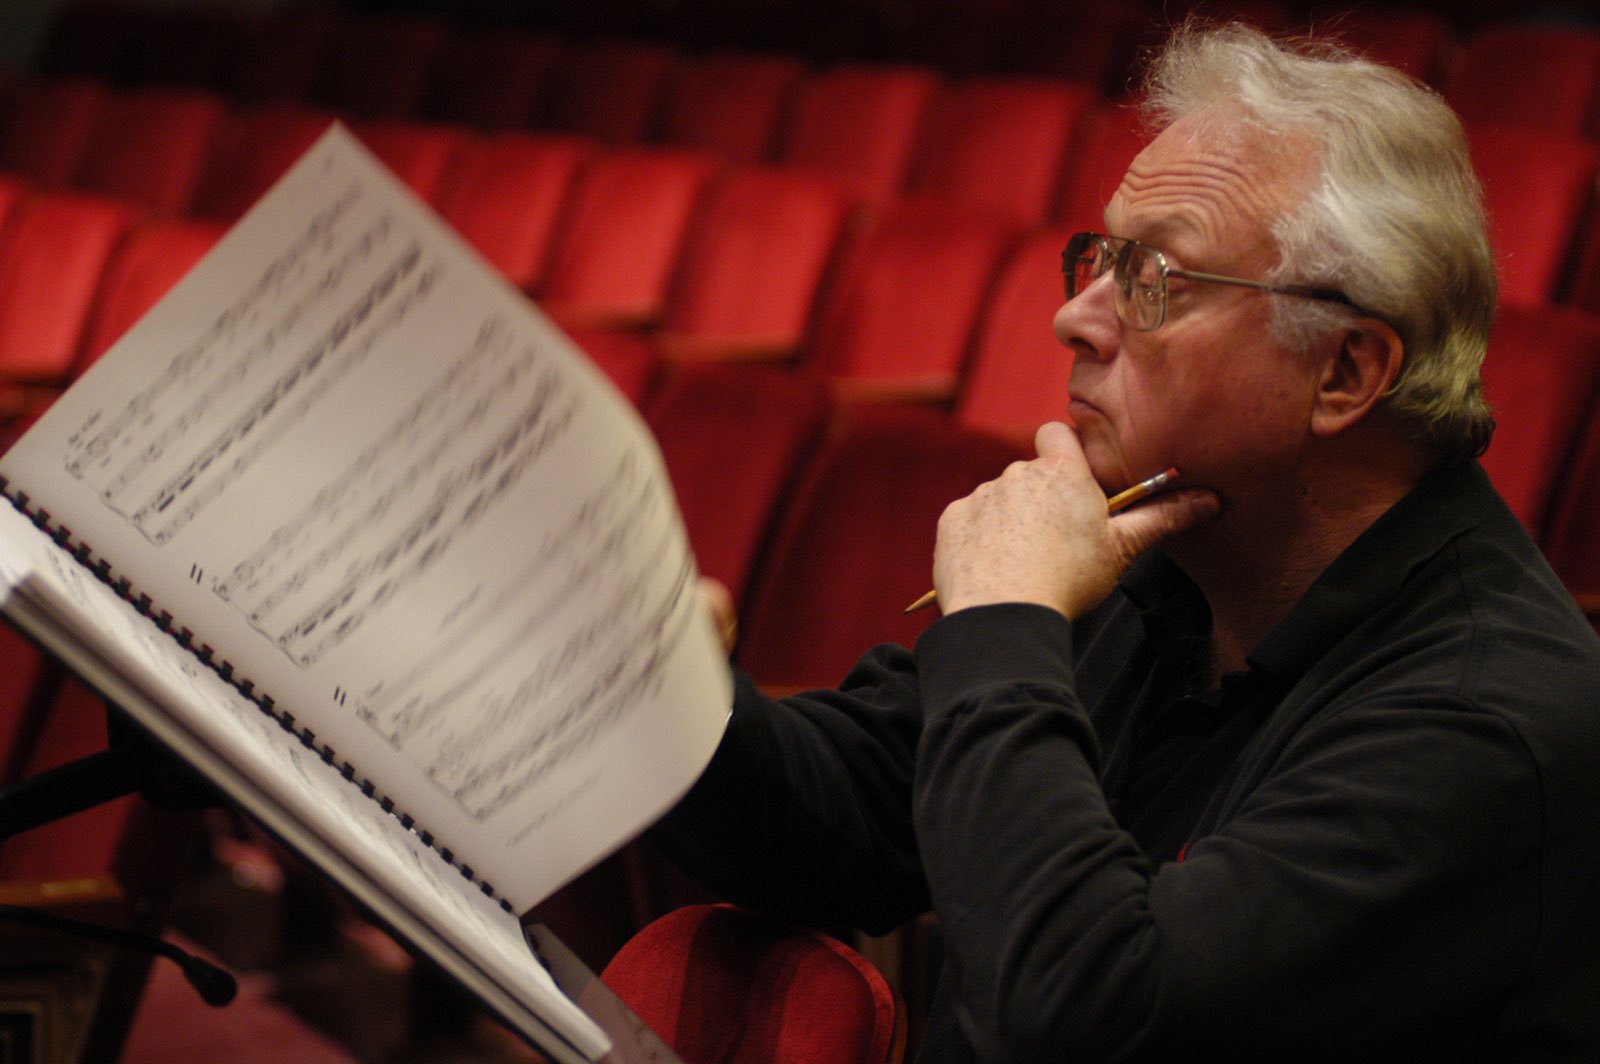 Songs of innocence and experience Wishing the American composer William Bolcom happy birthday! 